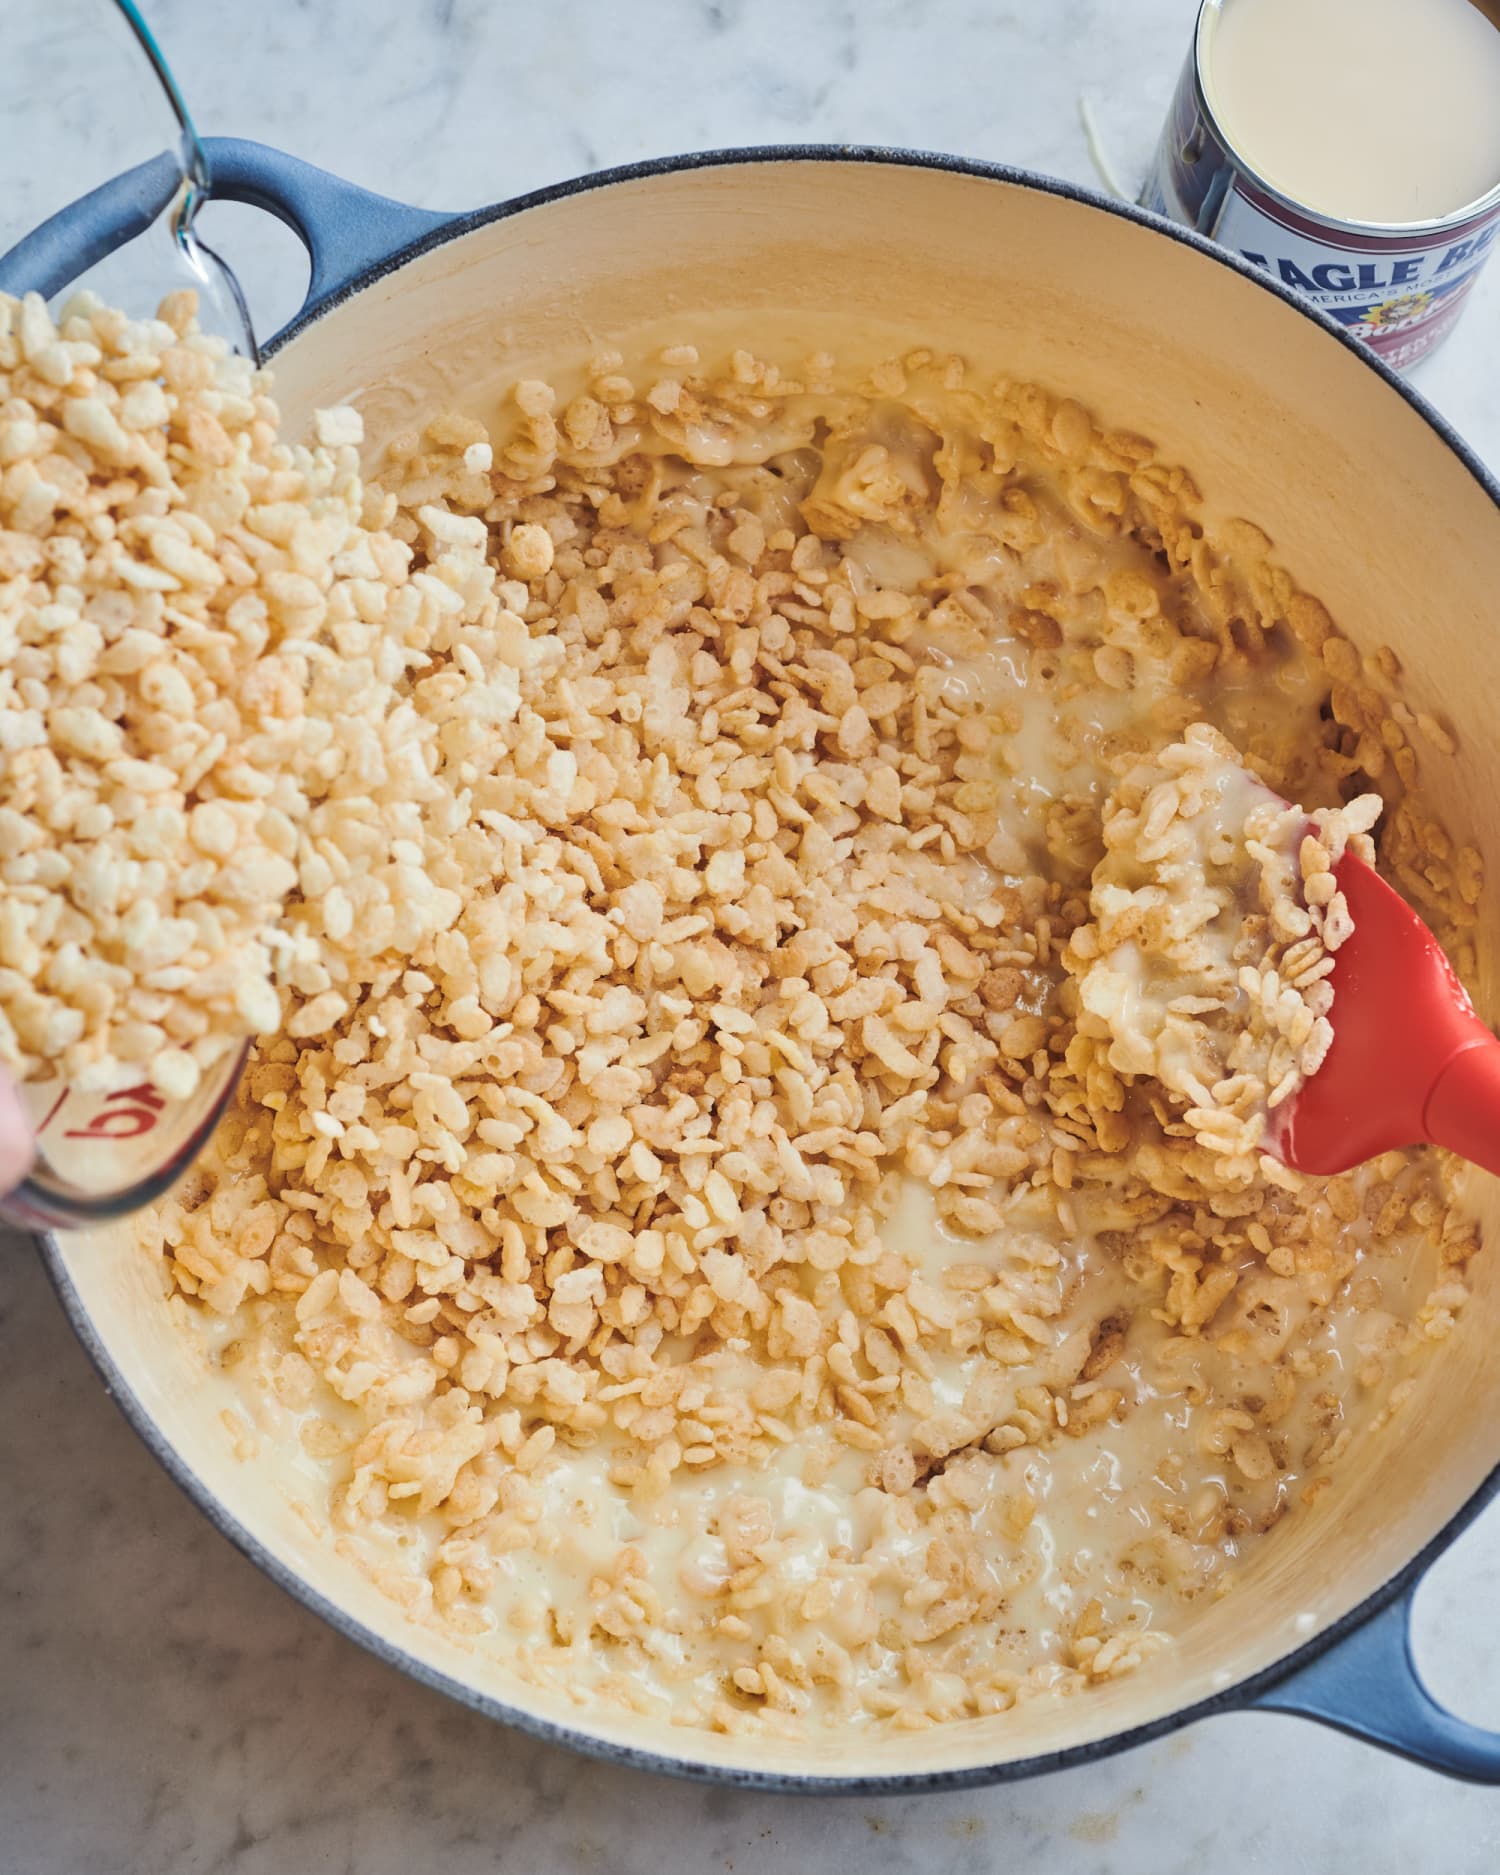 Rice Krispies Treats Just Got the Most Amazing Upgrade Thanks to a Surprise Ingredient